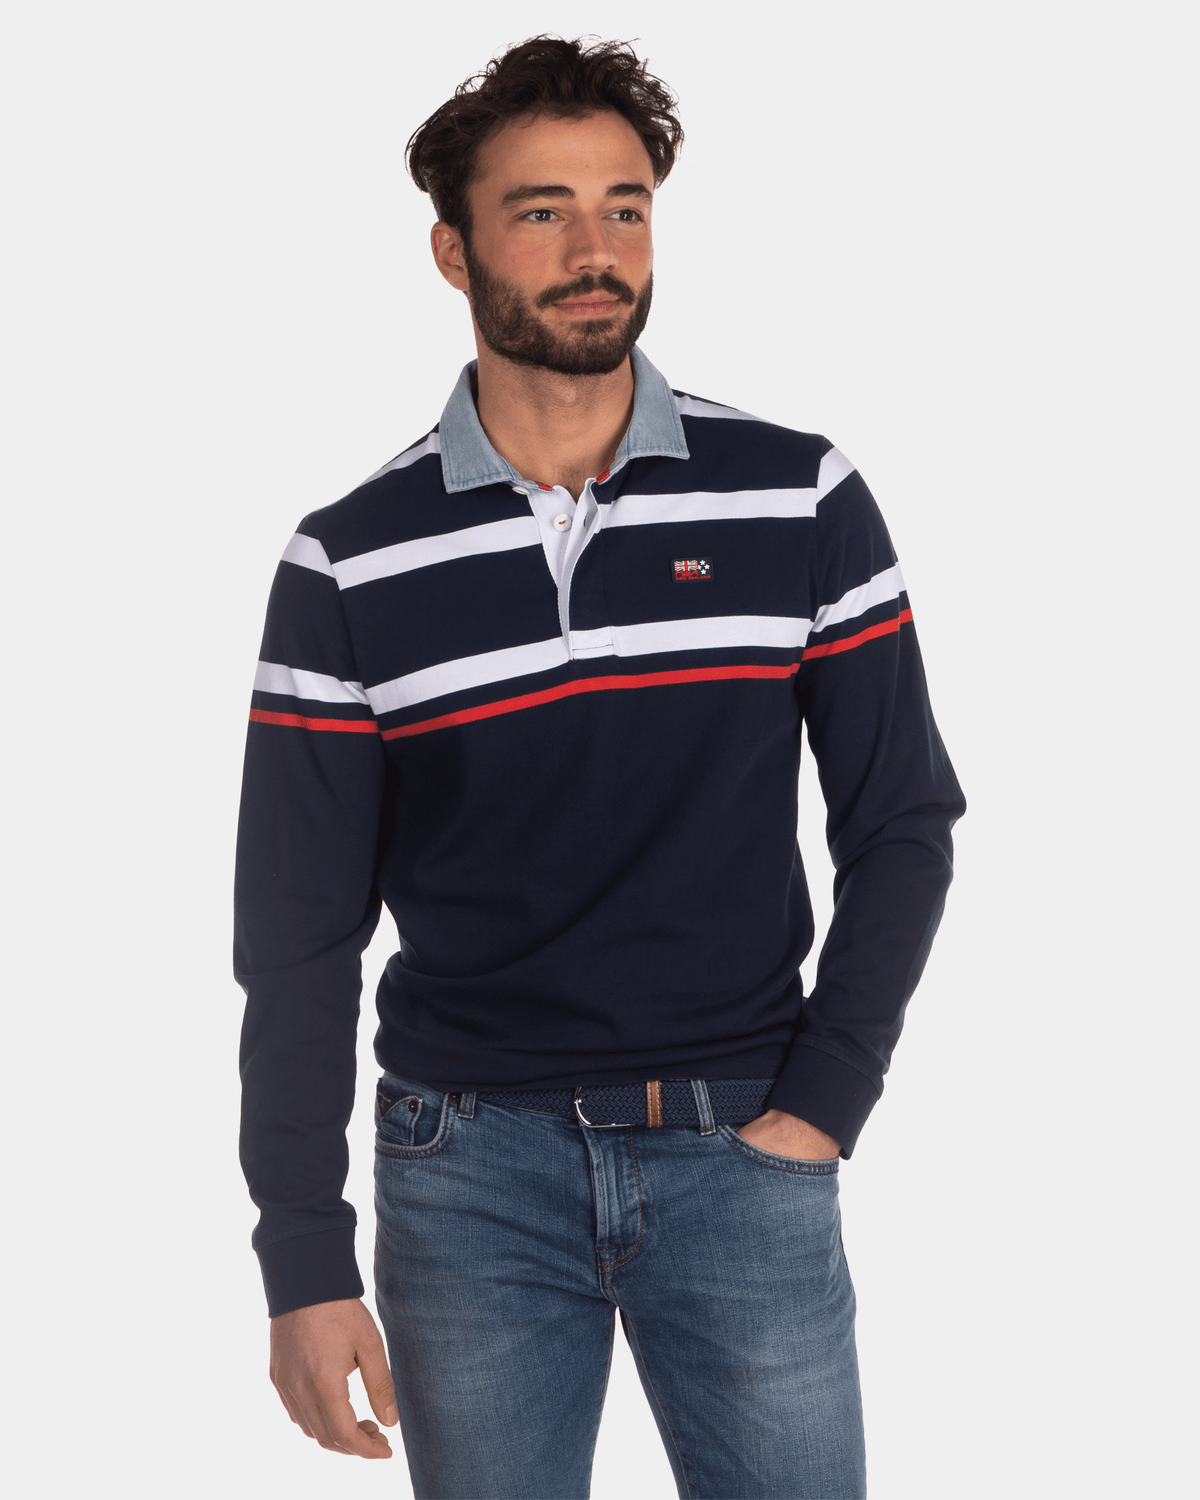 Coarse Striped Rugby Shirt Blue White Red - Industrial Navy